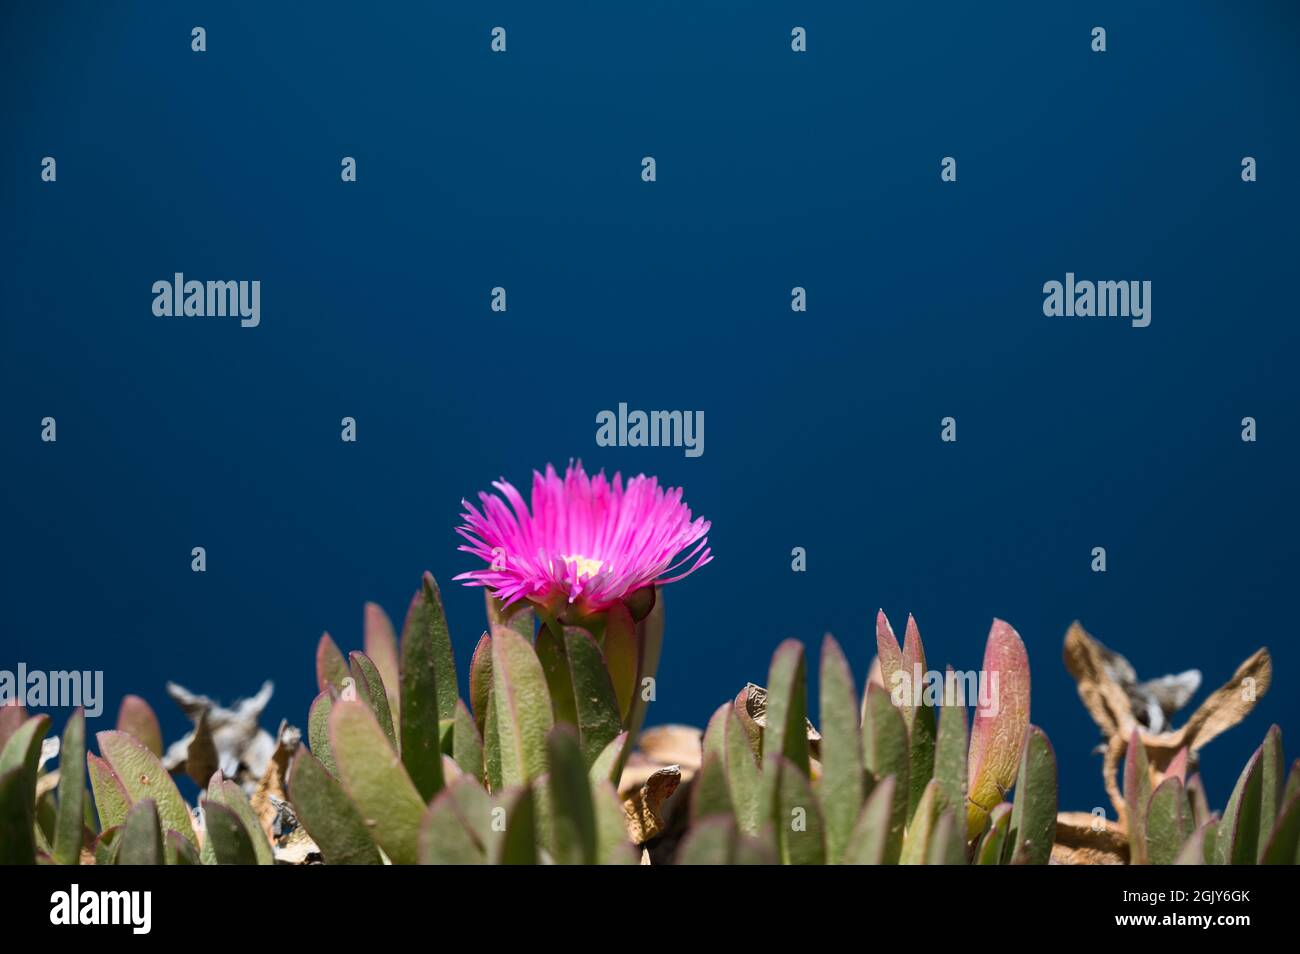 Close-up of pink flower with blue background. Stock Photo